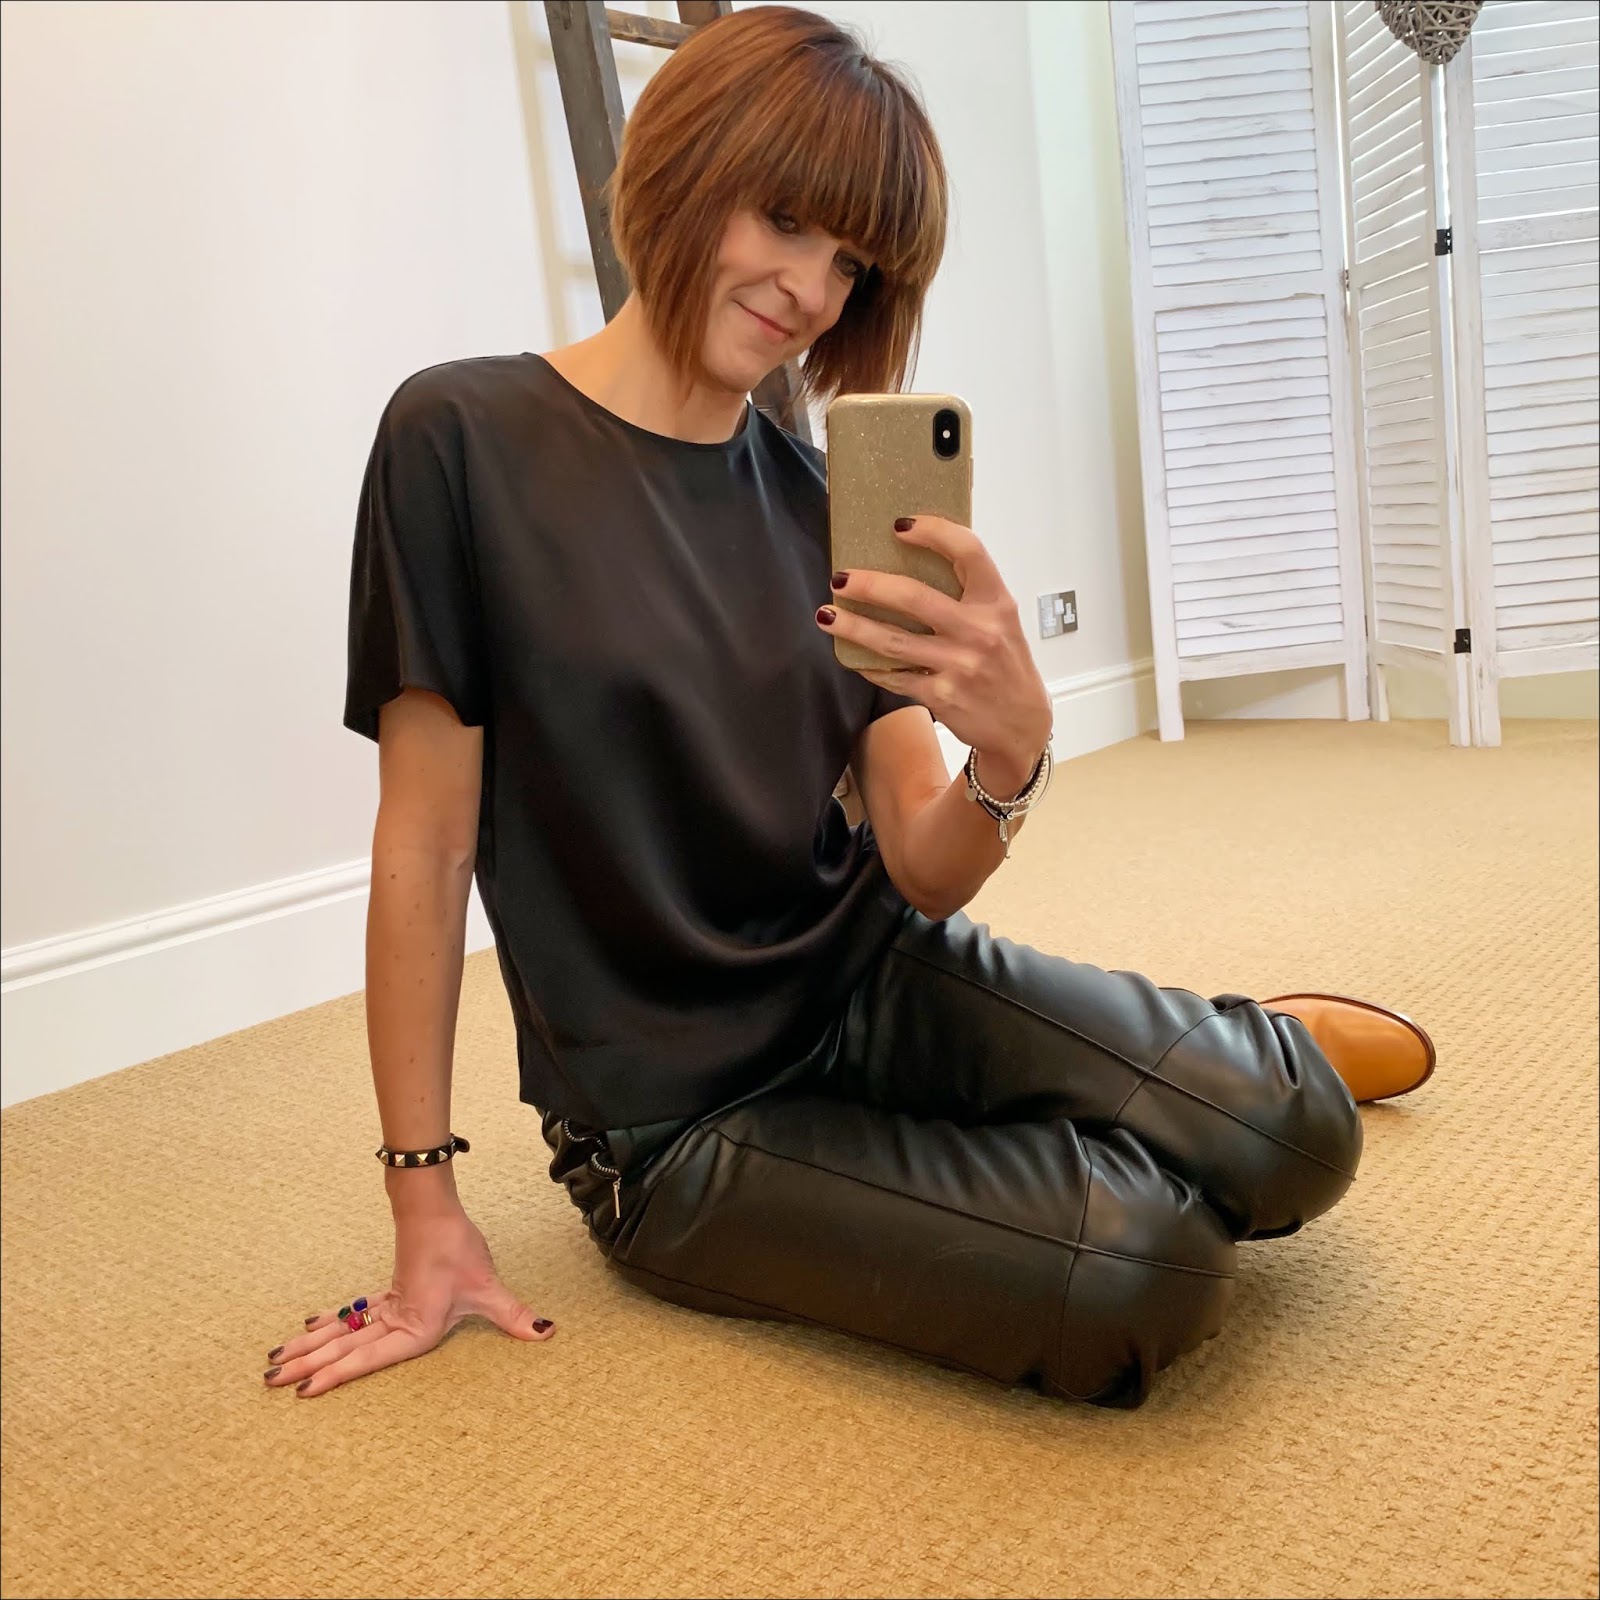 my midlife fashion, marks and spencer leather straight leg trousers, marks and spencer pure silk round neck short sleeve shell top, isabel marant etoile leather ankle boots, isabel marant etoile mohair cardigan, chanel vintage brooch